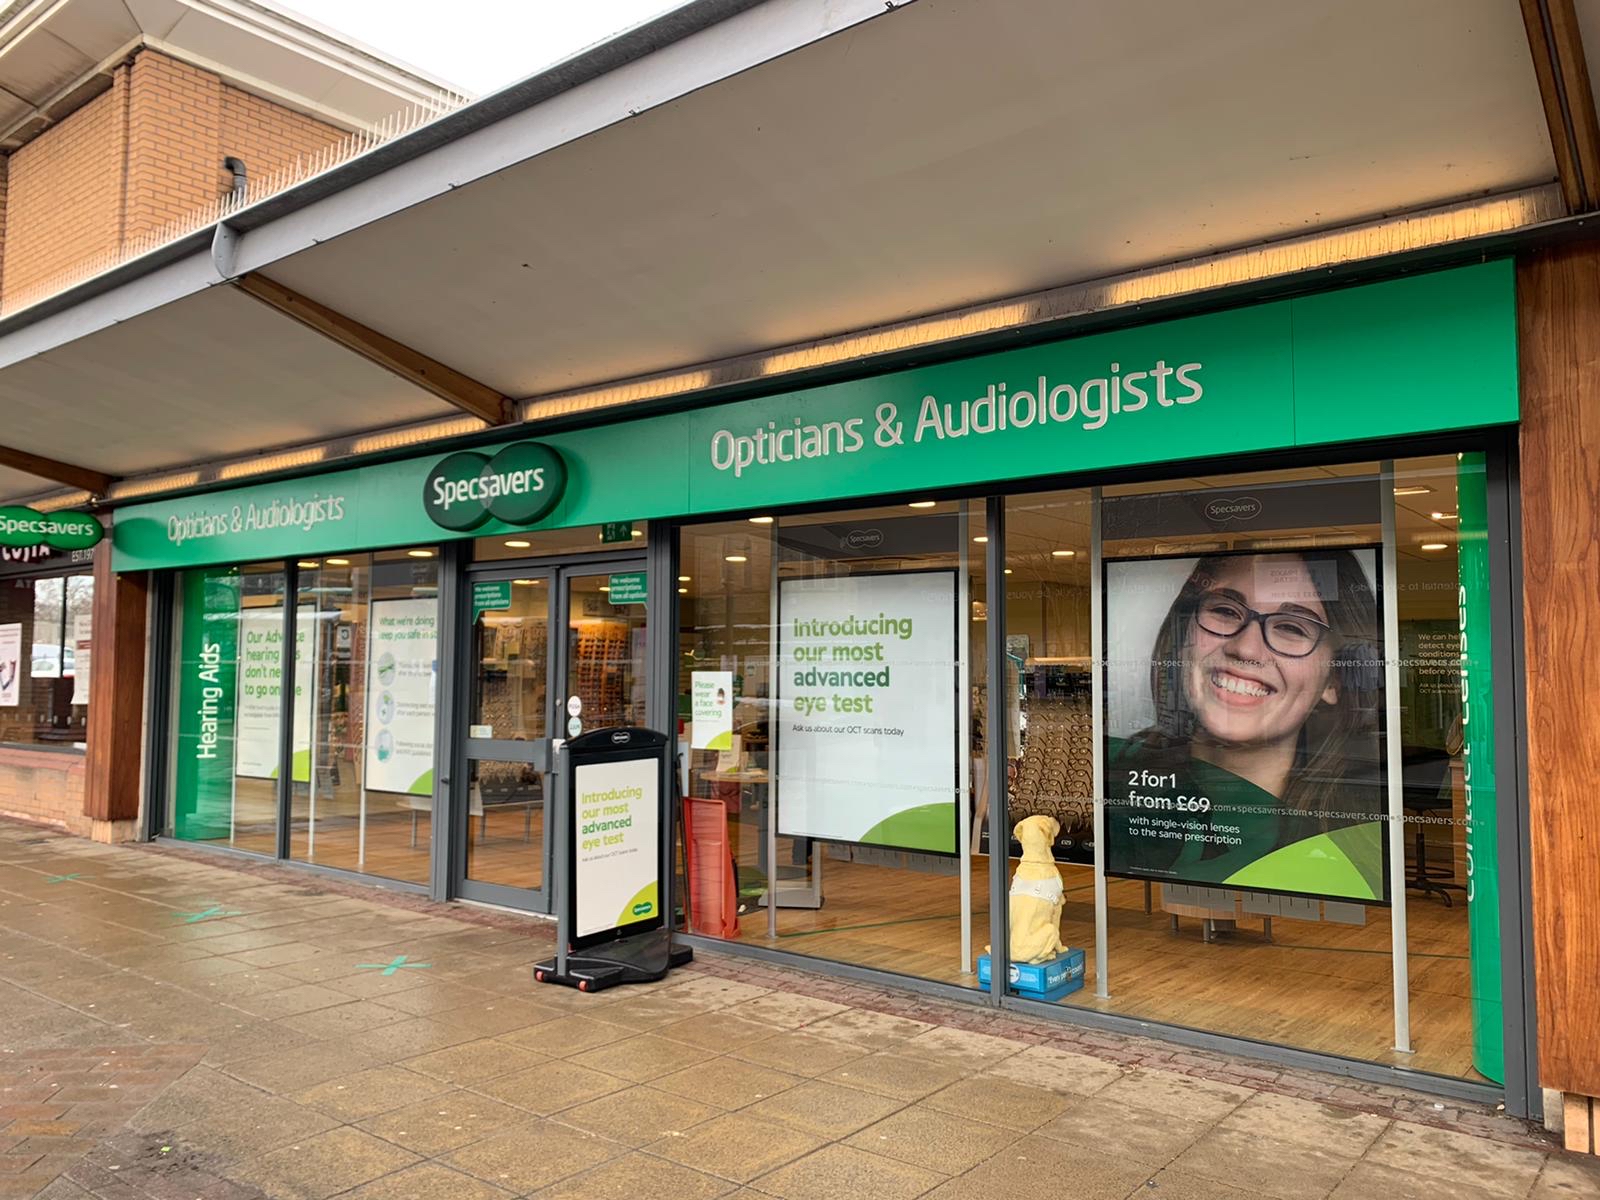 Images Specsavers Opticians and Audiologists - Blaydon